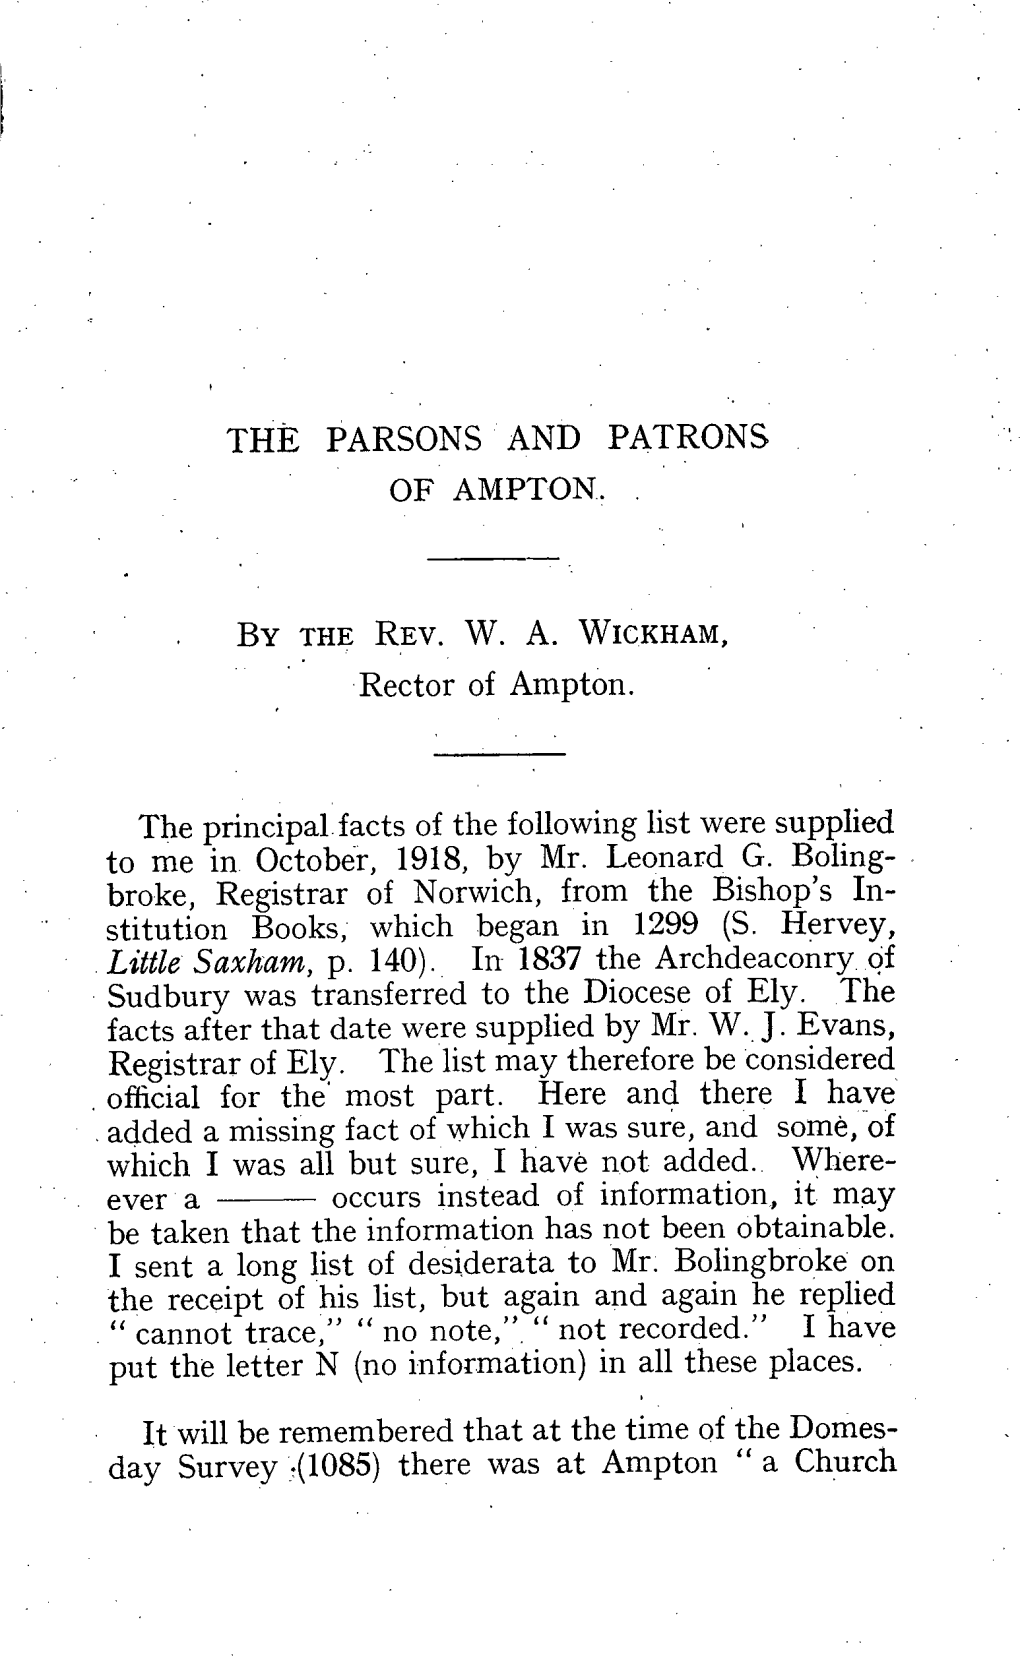 The Parsons and Patrons of Ampton W. A. Wickham